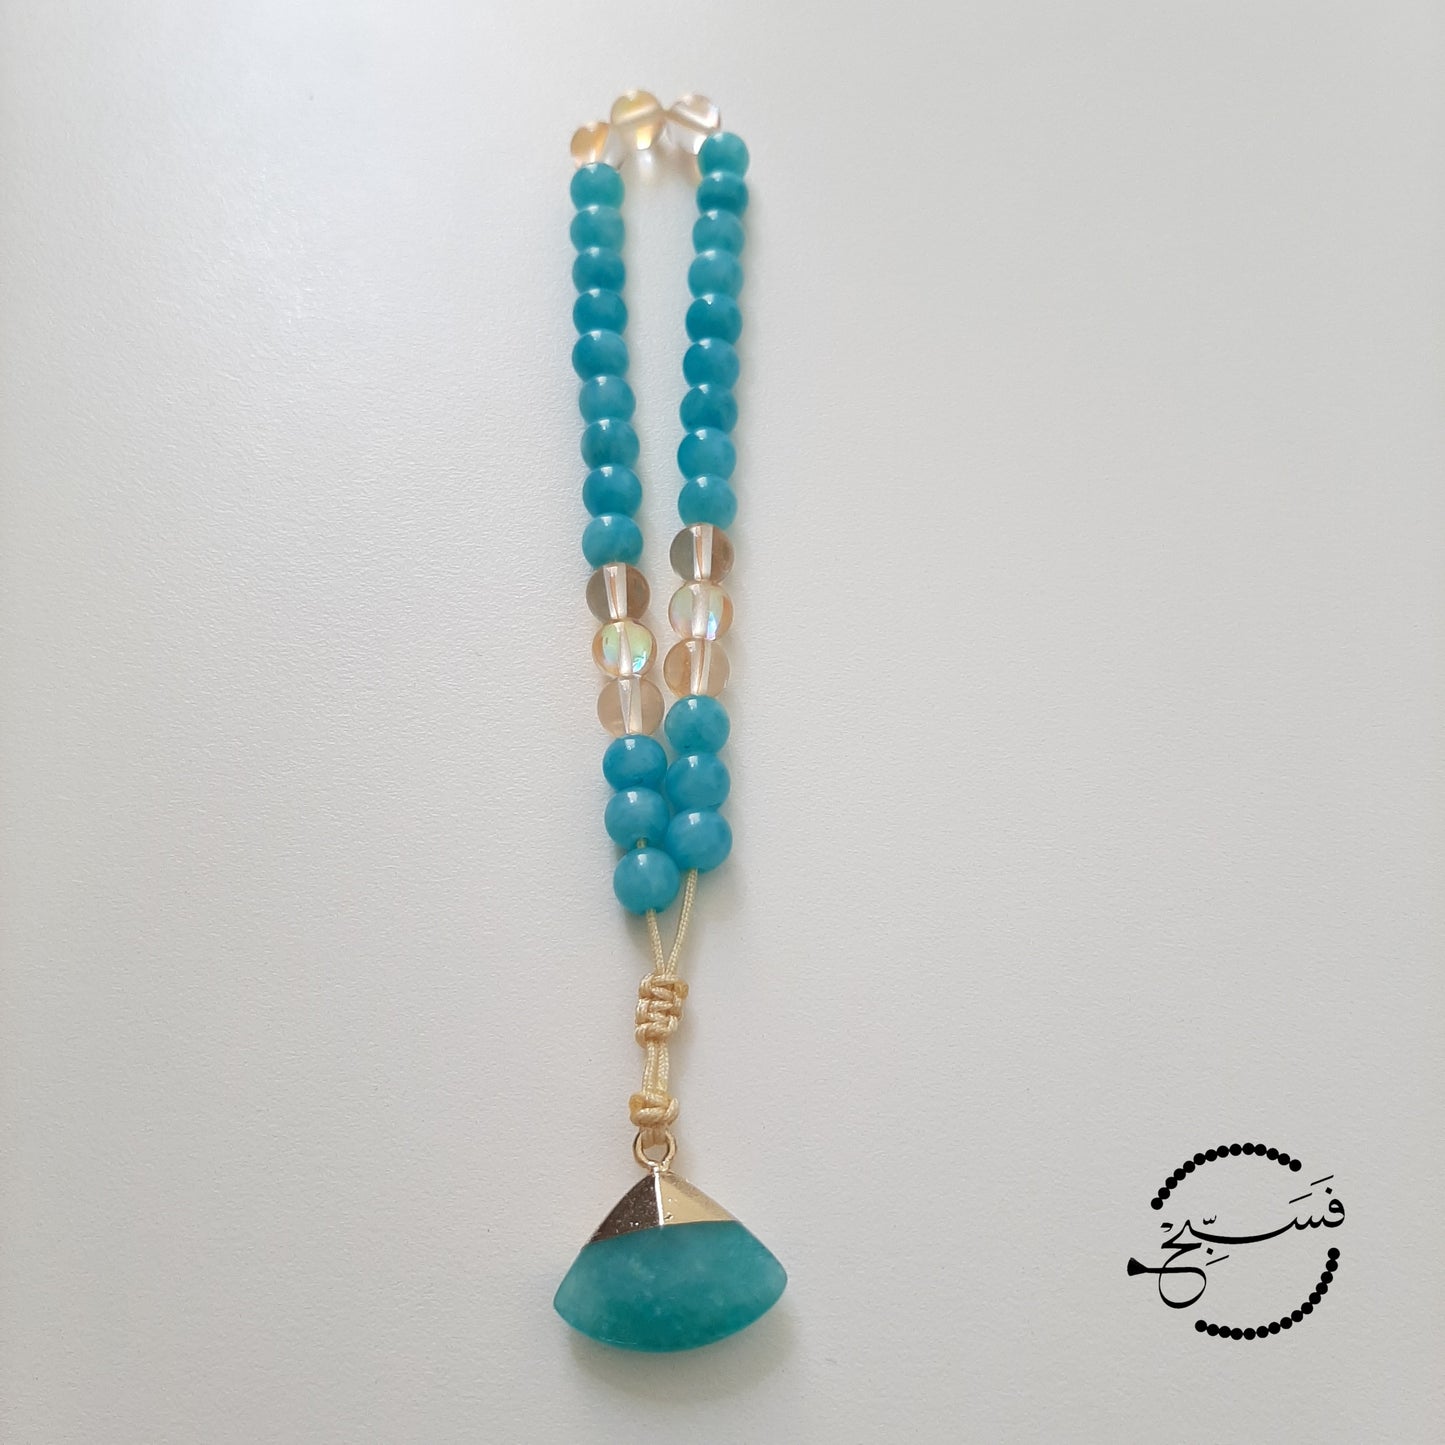 Natural amazonite with gold moonstone beads and a quartz pendant.  Features an adjustable knot.  33 beads (6mm beads)